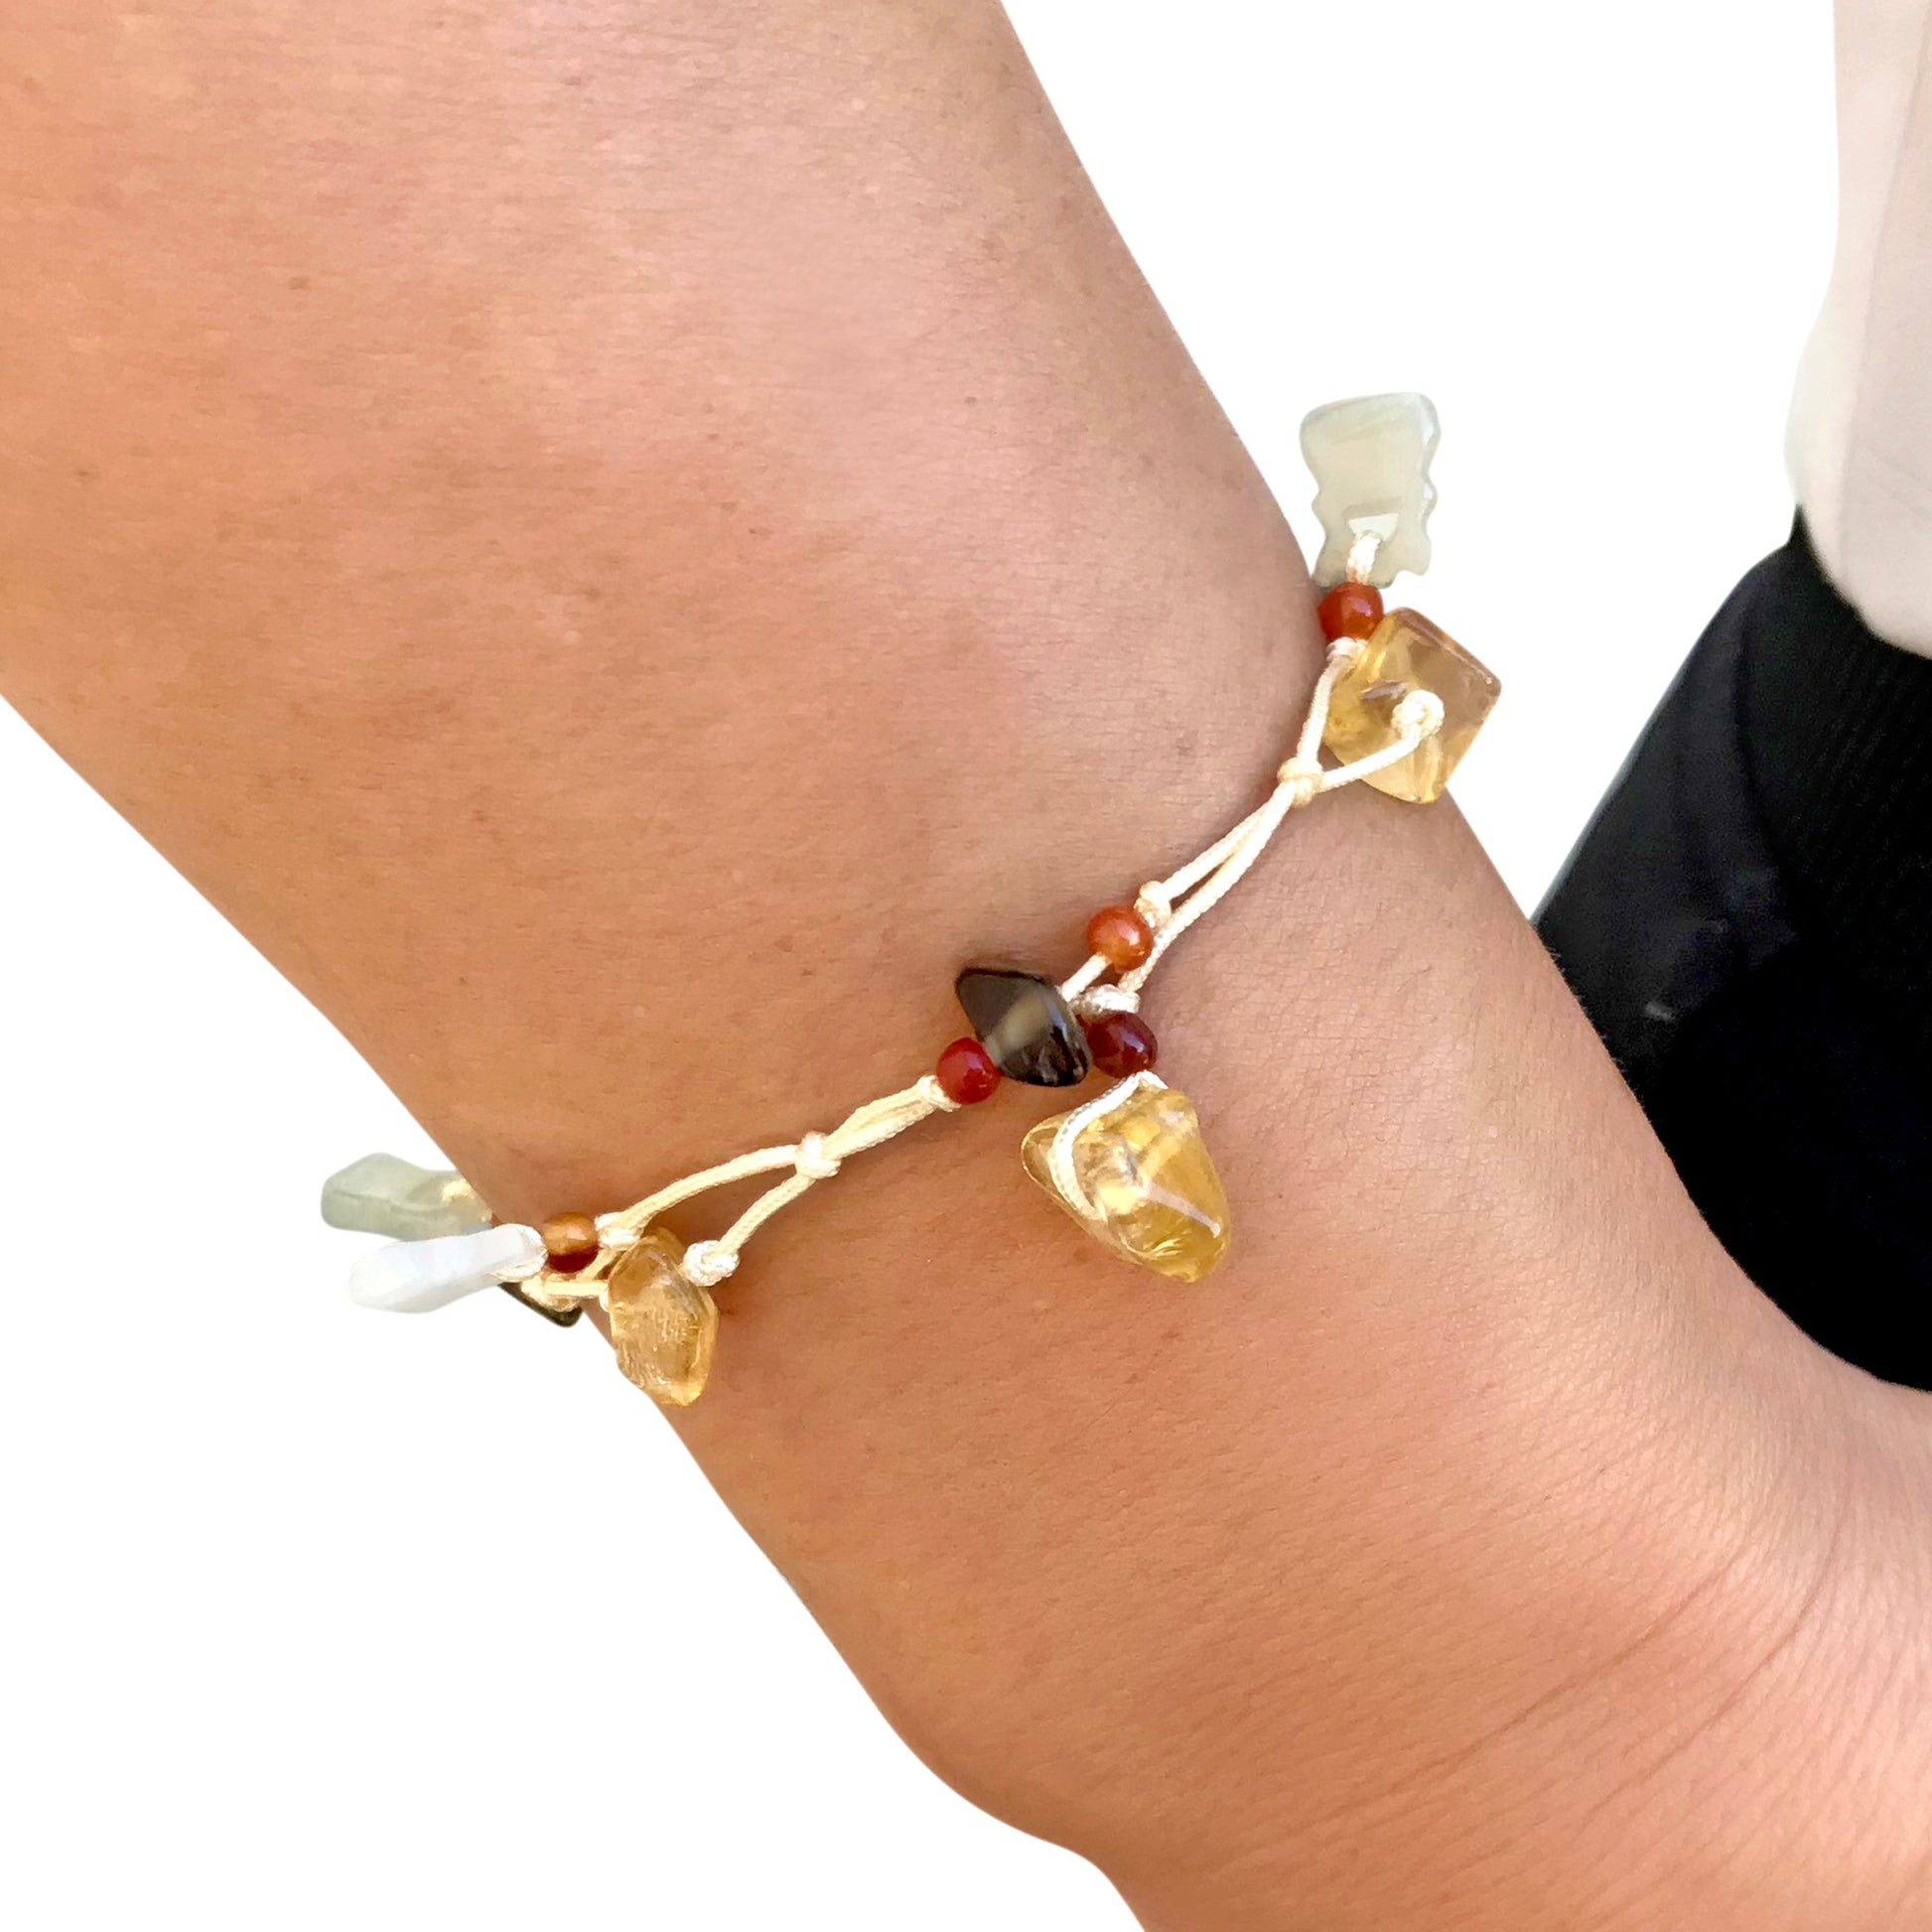 Attract Wealth and Fortune with this Money Pouch Gemstones Bracelet